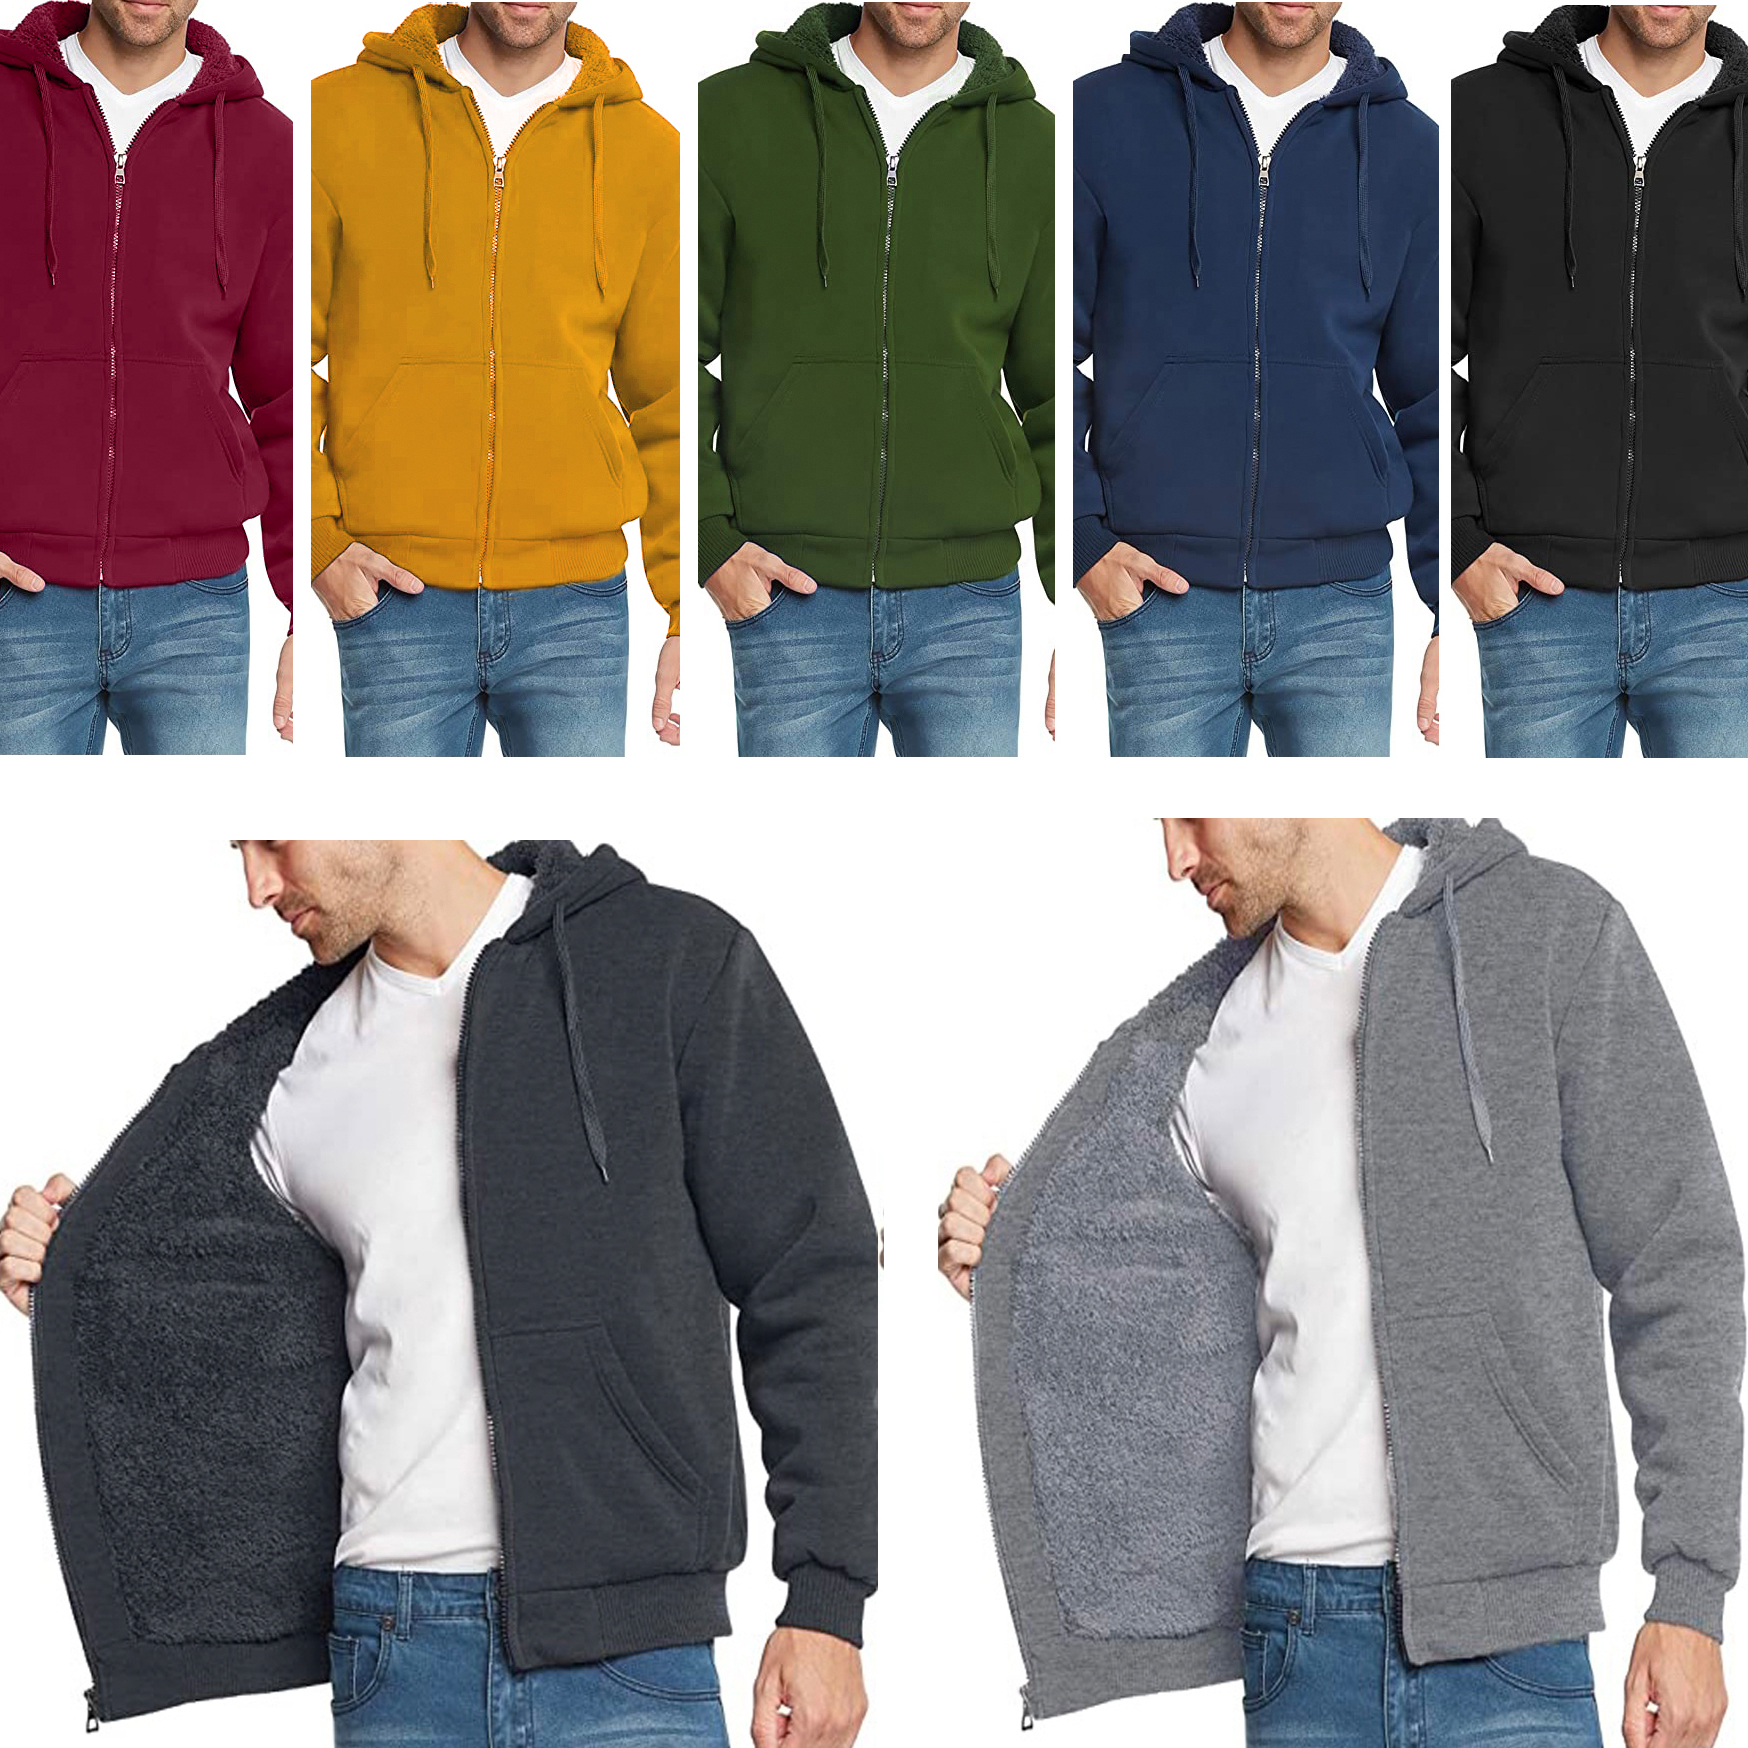 Men's Extra-Thick Sherpa Lined Fleece Hoodie (Big & Tall Sizes Available) - Charcoal, 4XL